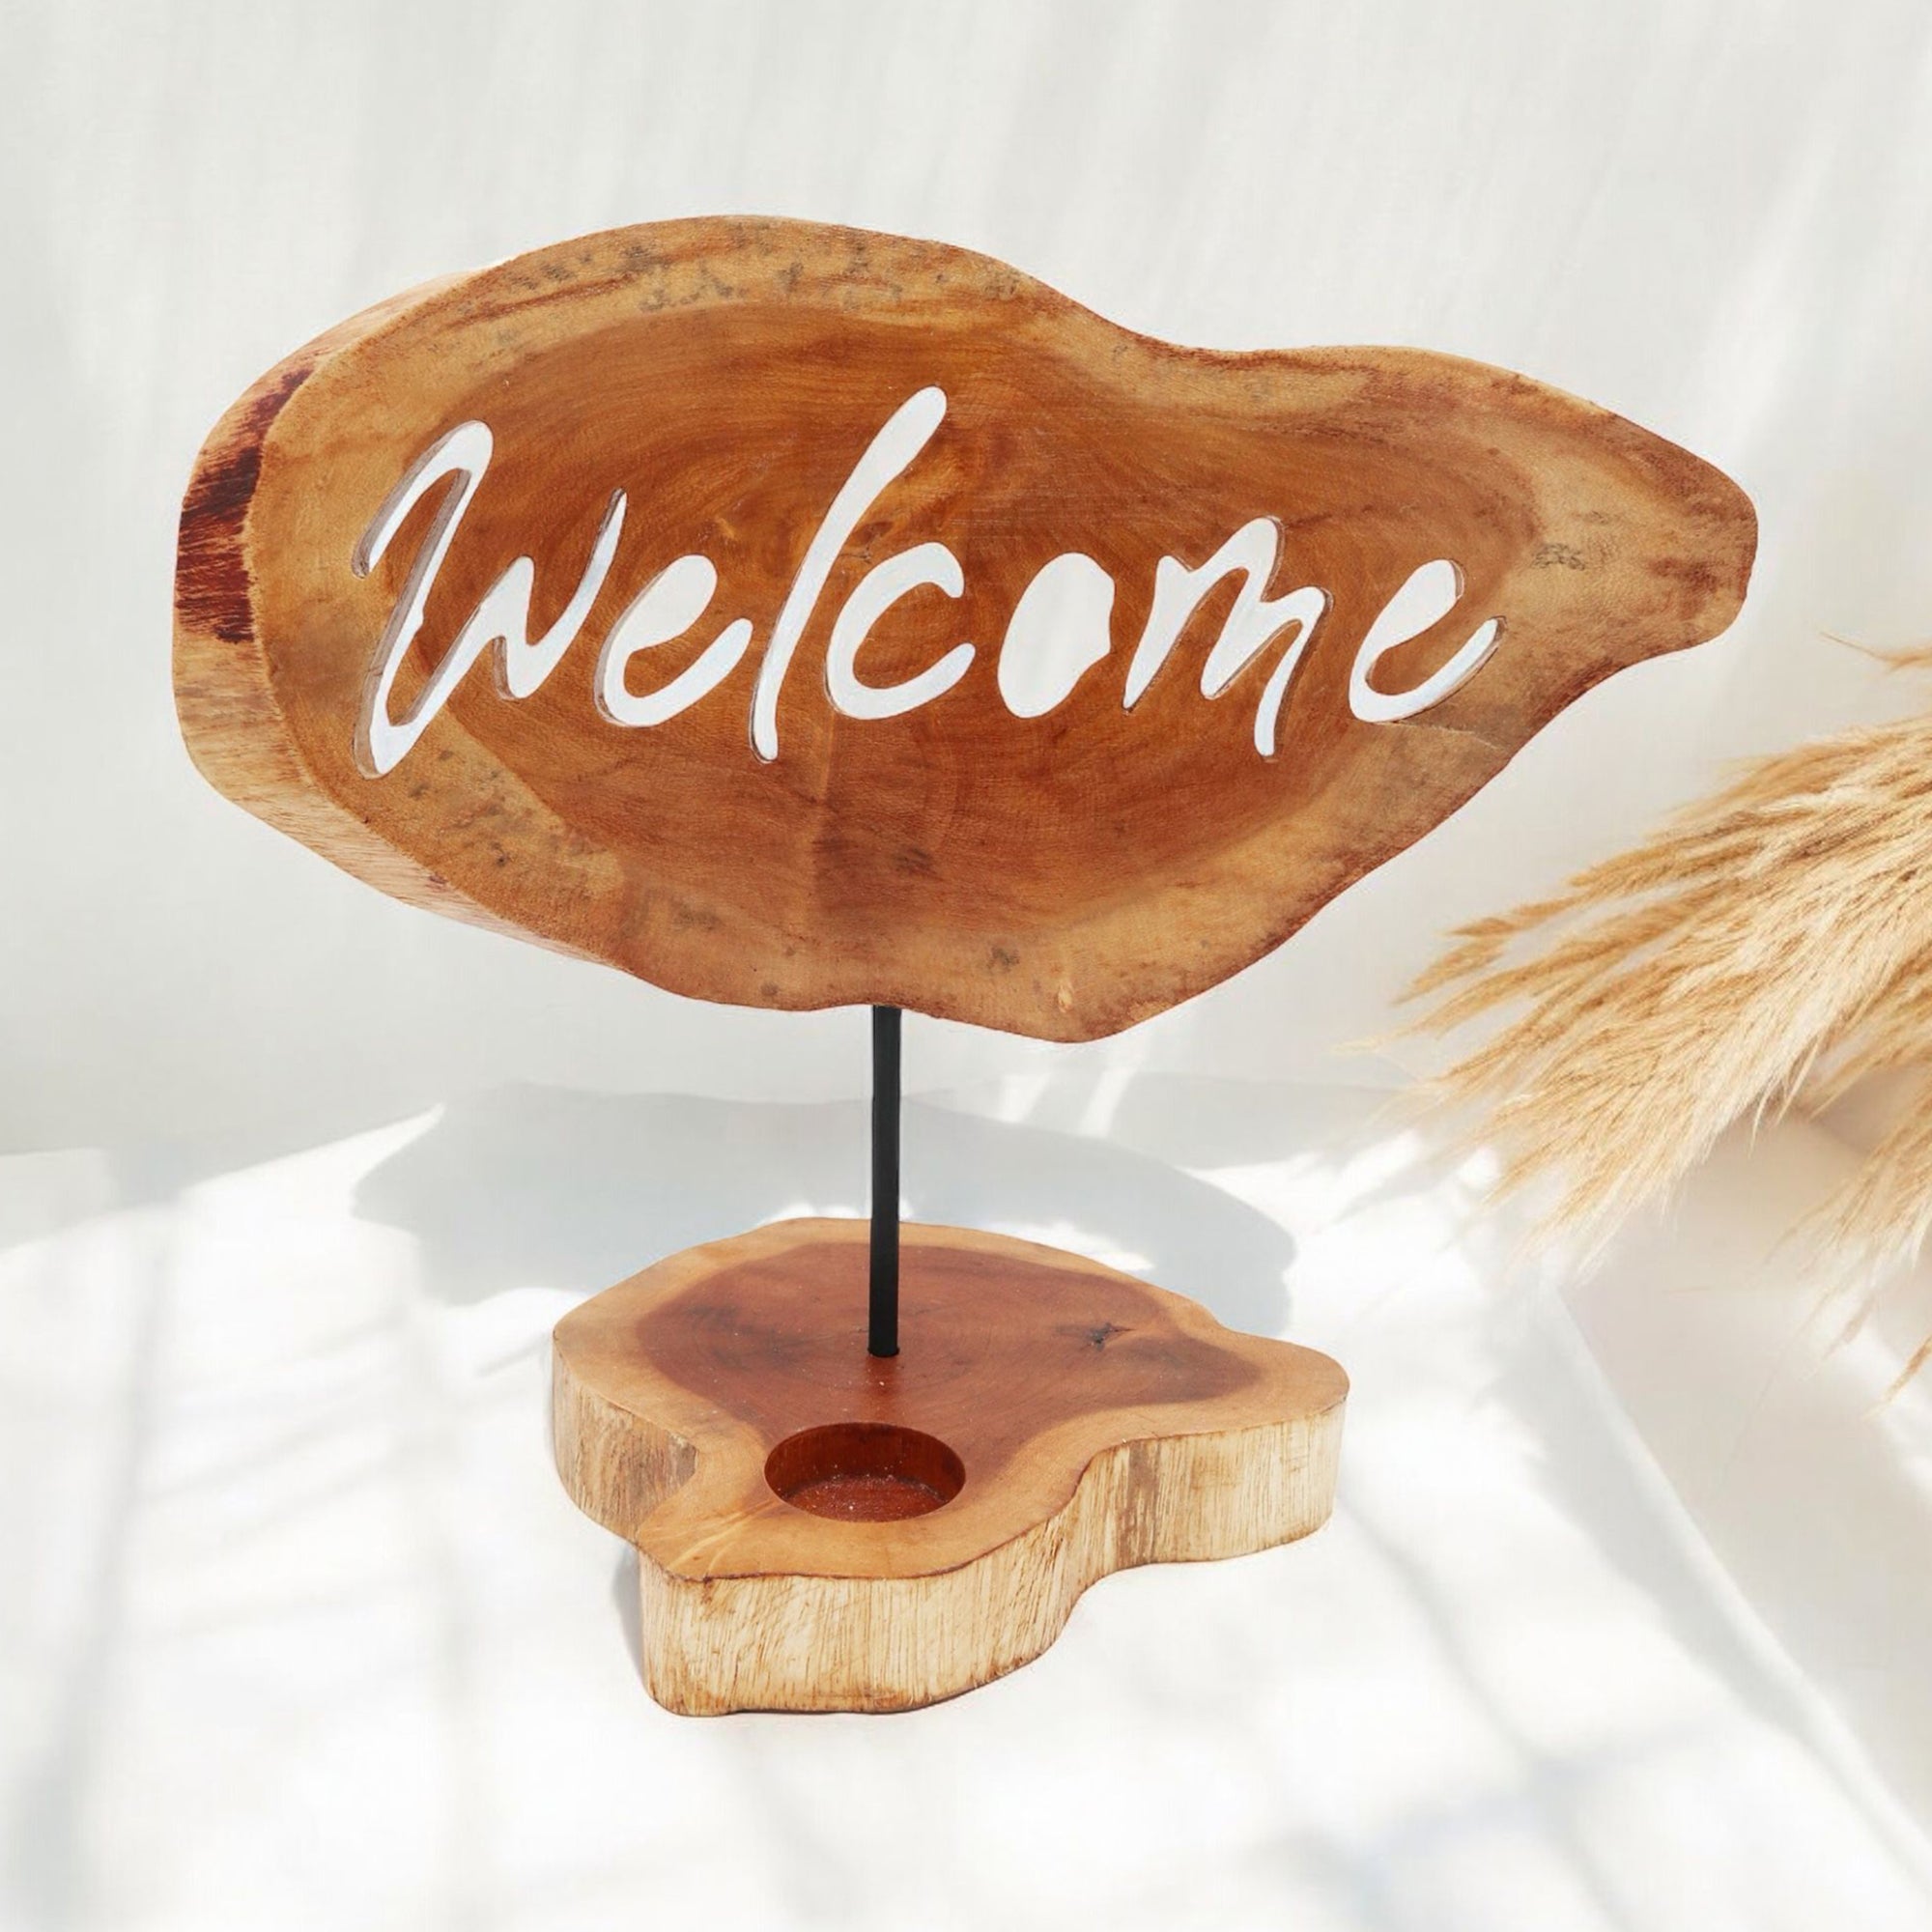 Welcome Tealight Holder - Welcome Home Candle Holder - Rustic Home Decor